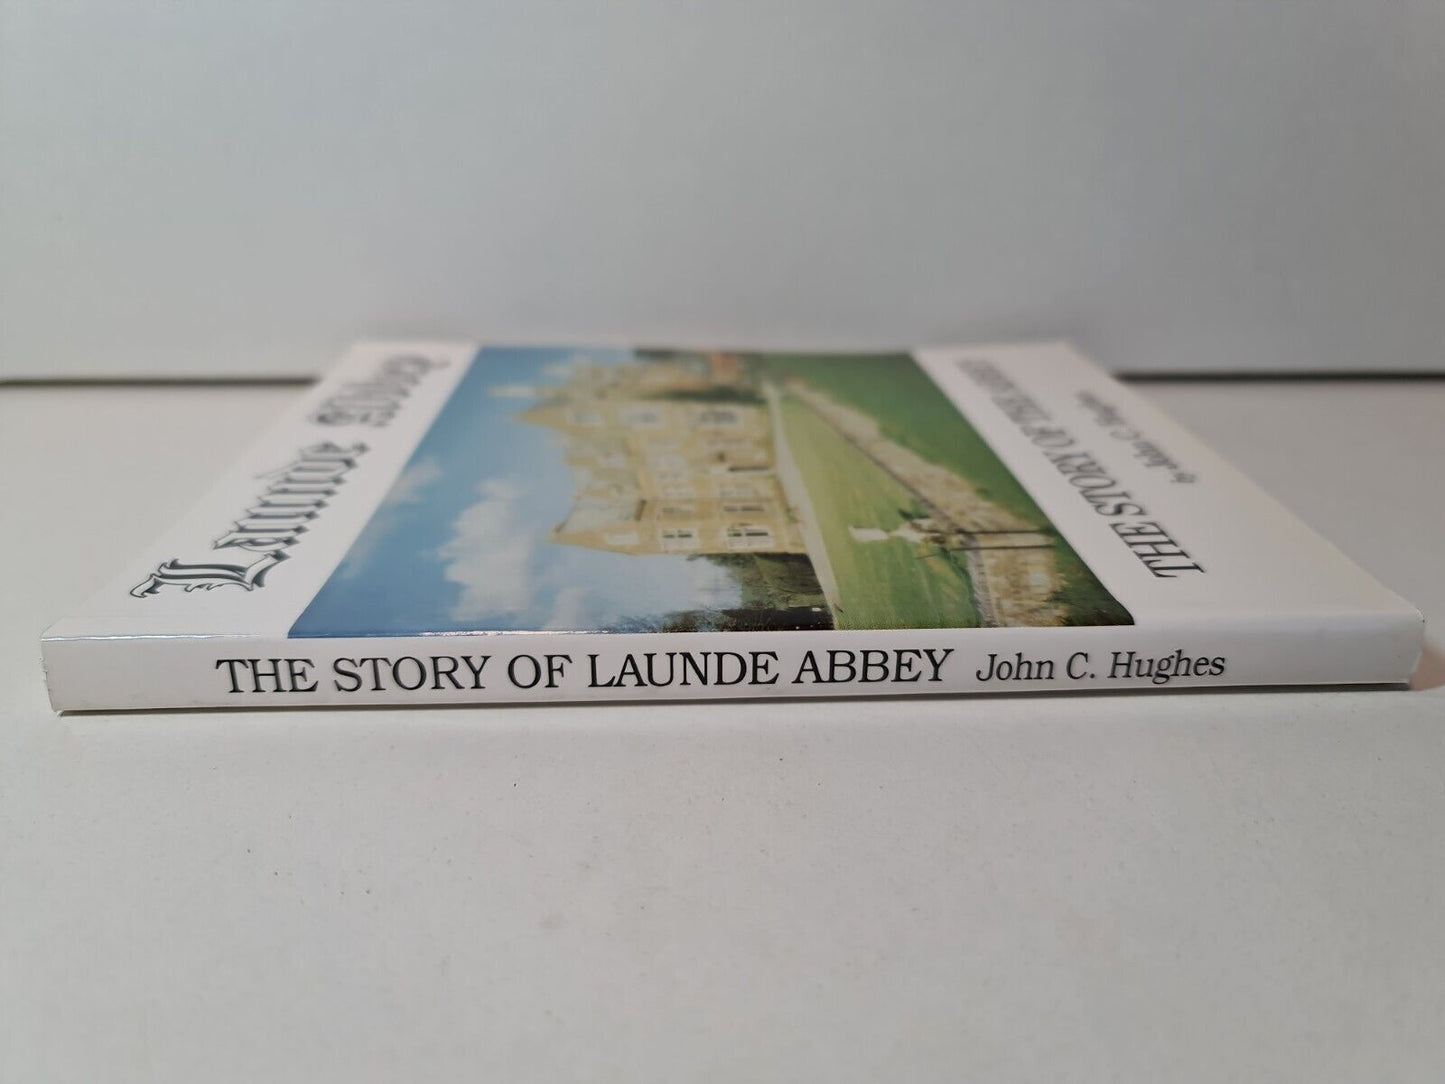 Launde Abbey: The Story of the Abbey by John C Hughes (1998)